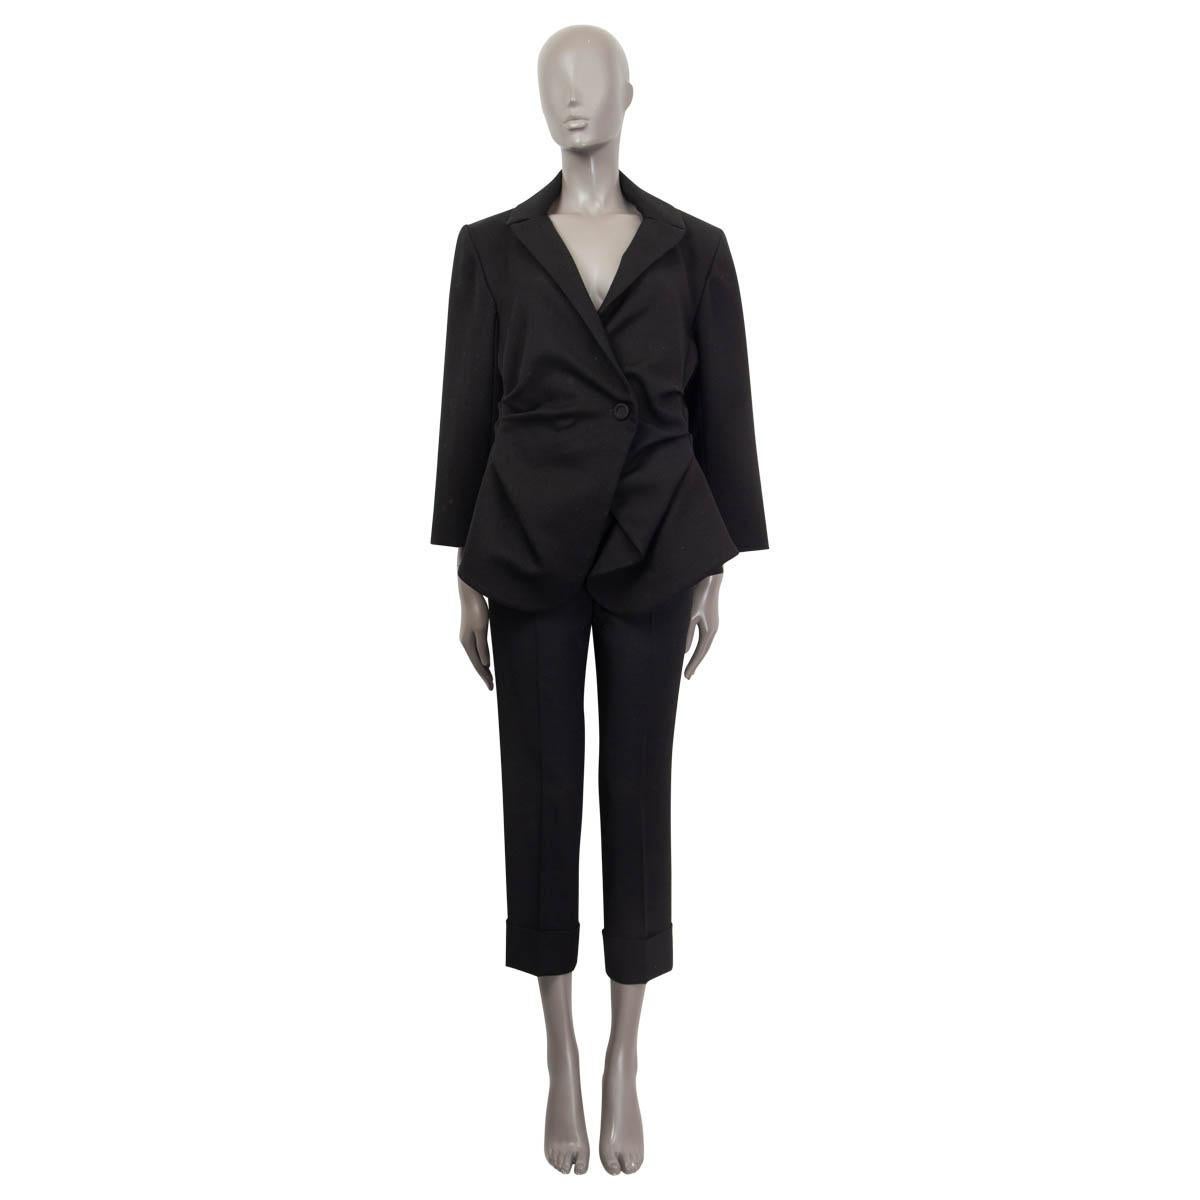 100% authentic Jacquemus Fall/Winter 2018 'Le Souk' blazer in black wool (100%). Features ruches at the hemline and a notch collar. Closes with one black button and one concealed button on the front. Lined in black viscose (51%) and cotton (49%).